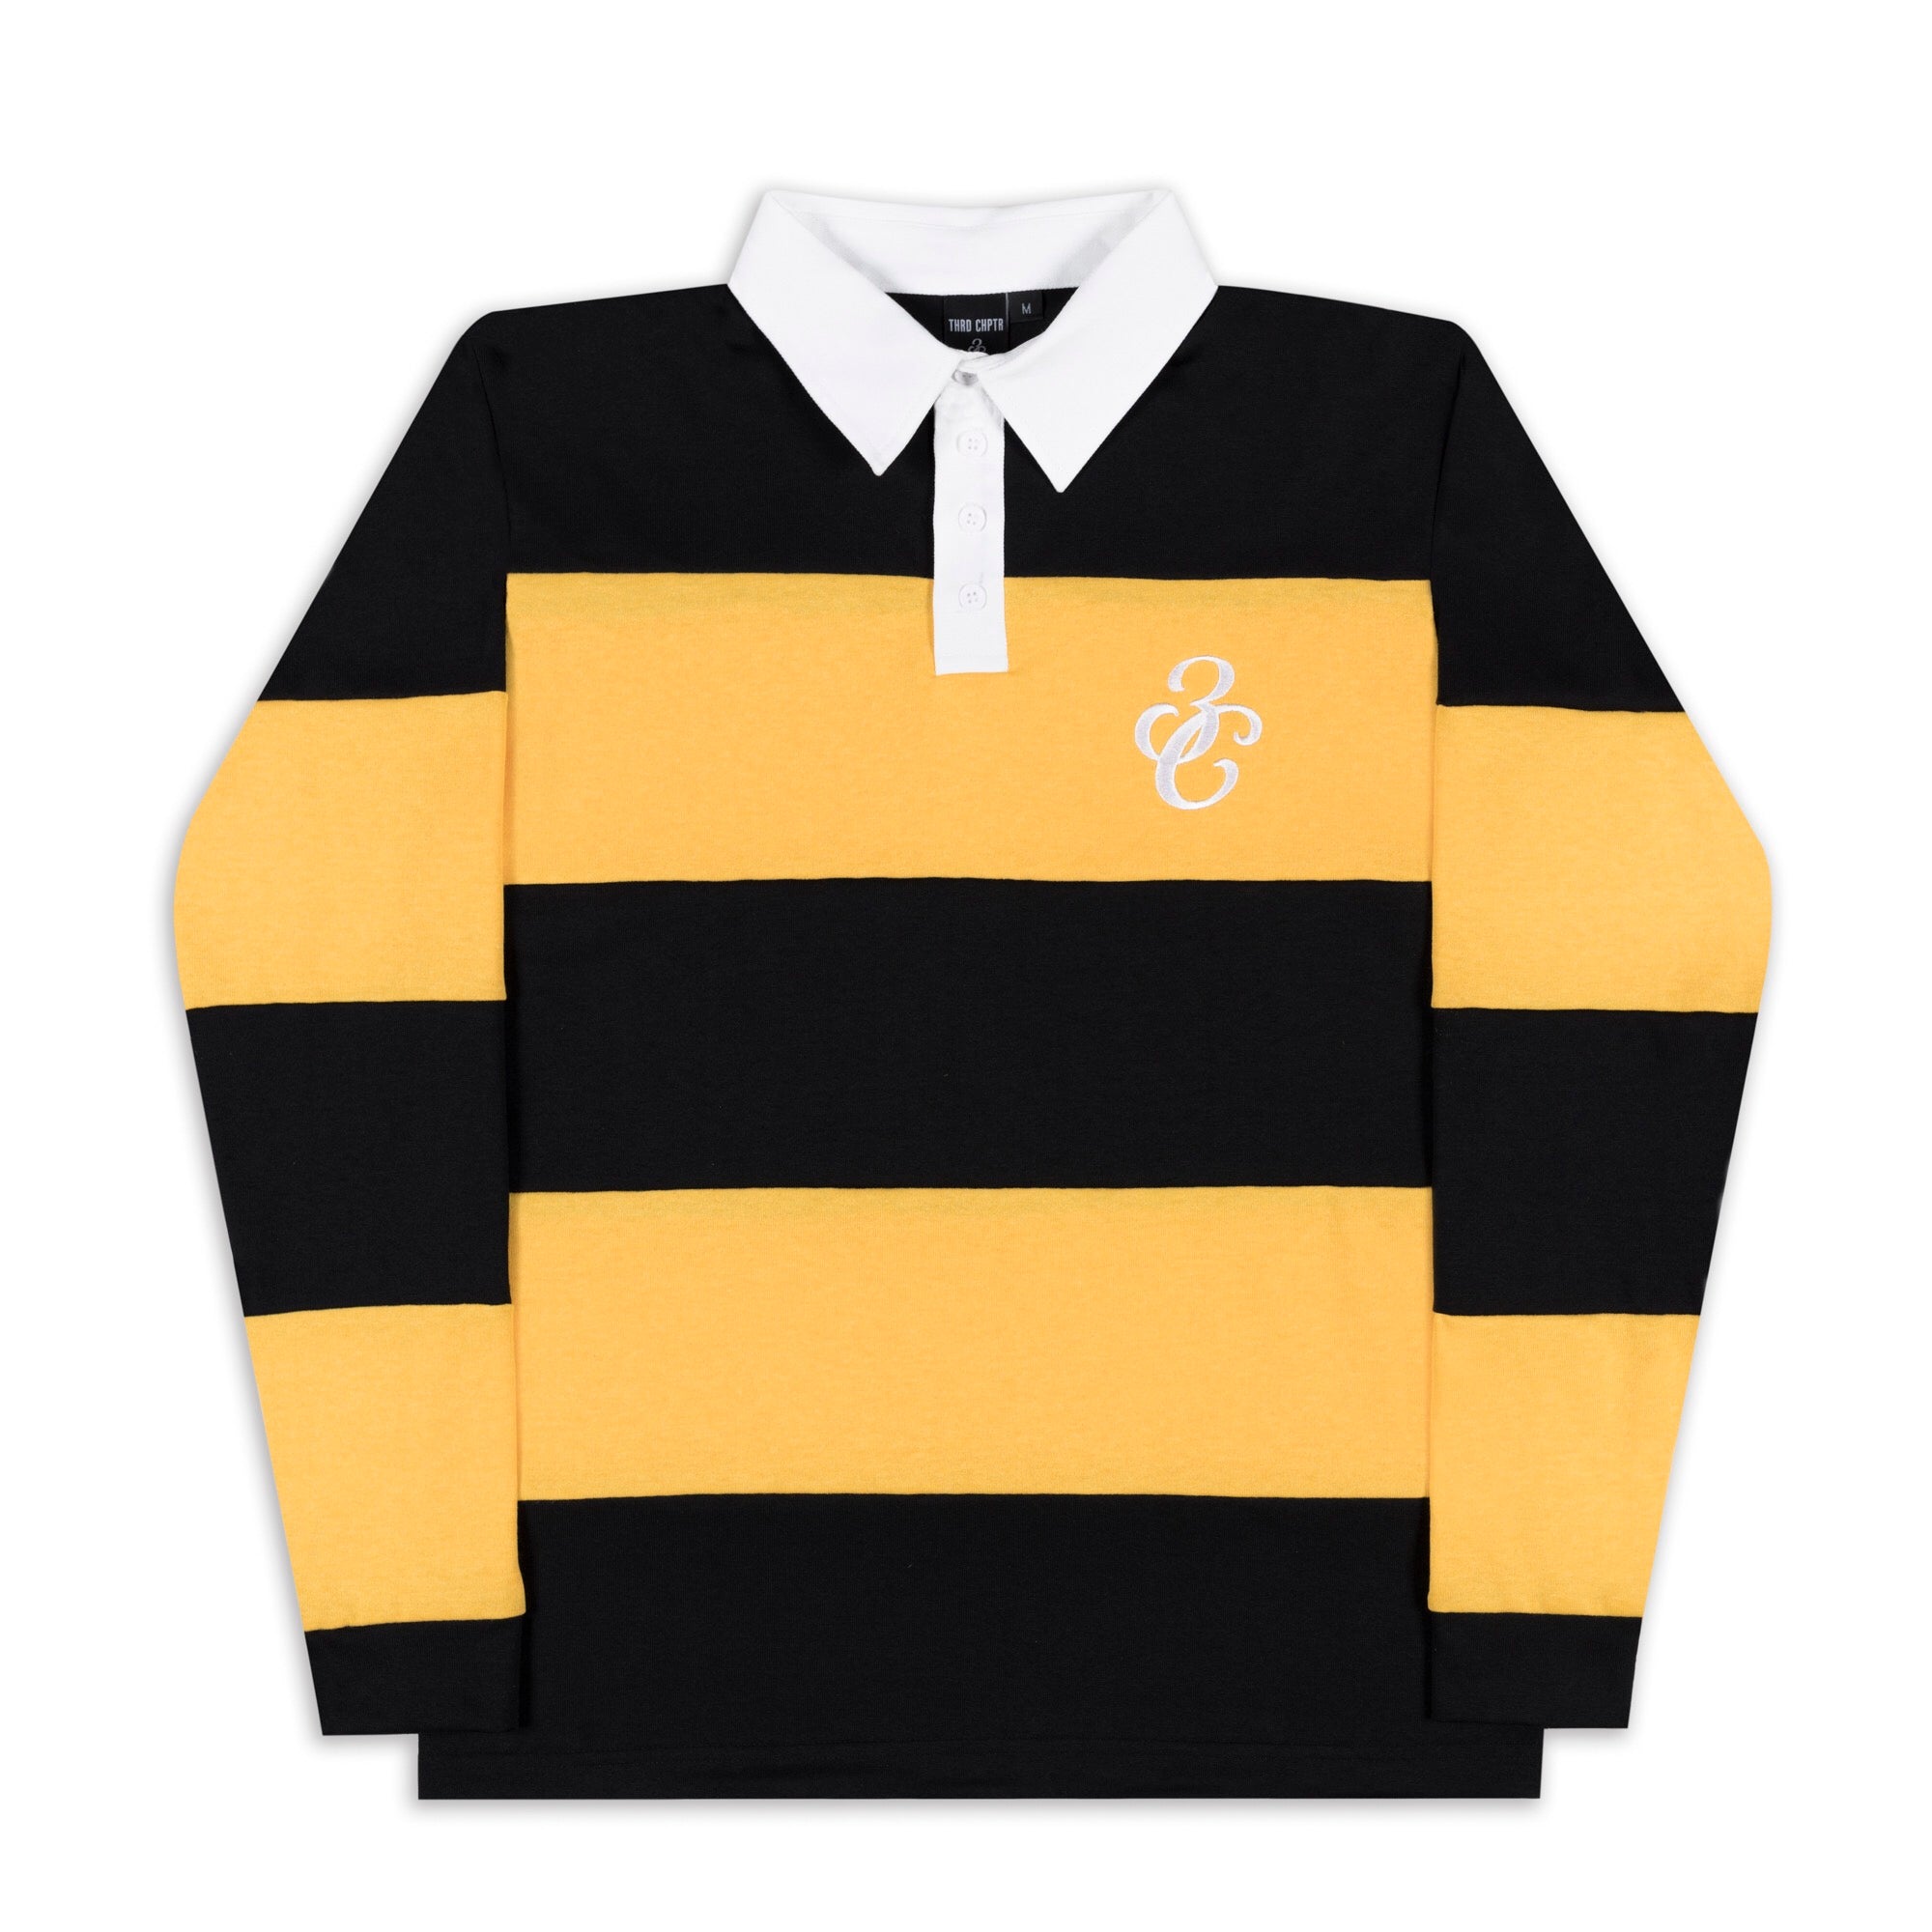 black and yellow rugby jersey